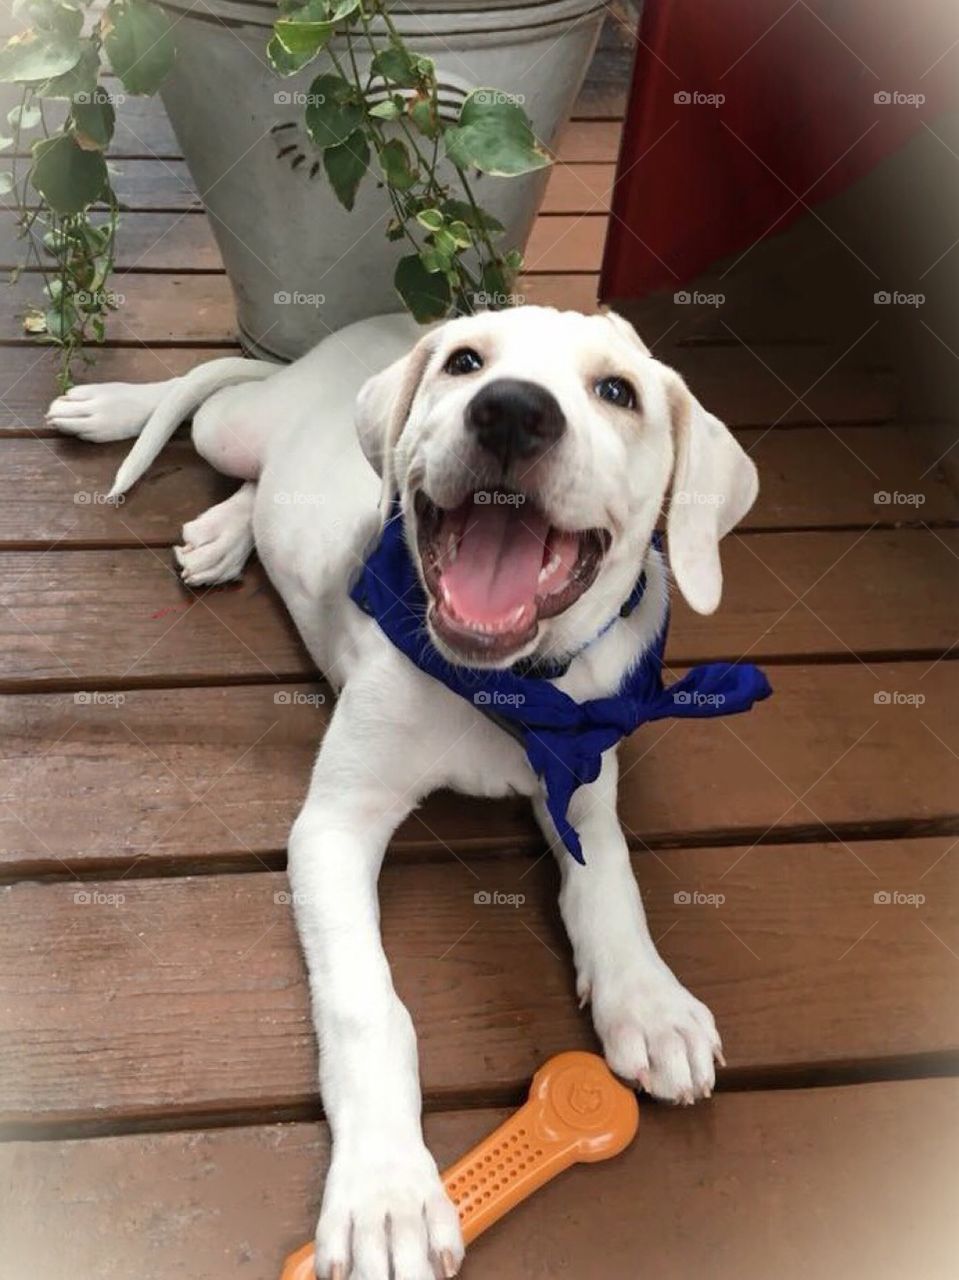 Adorable Labrador Retriever puppy who was rescued and adopted by a wonderful family and now has a forever home!  He’s very happy about it! ☺️